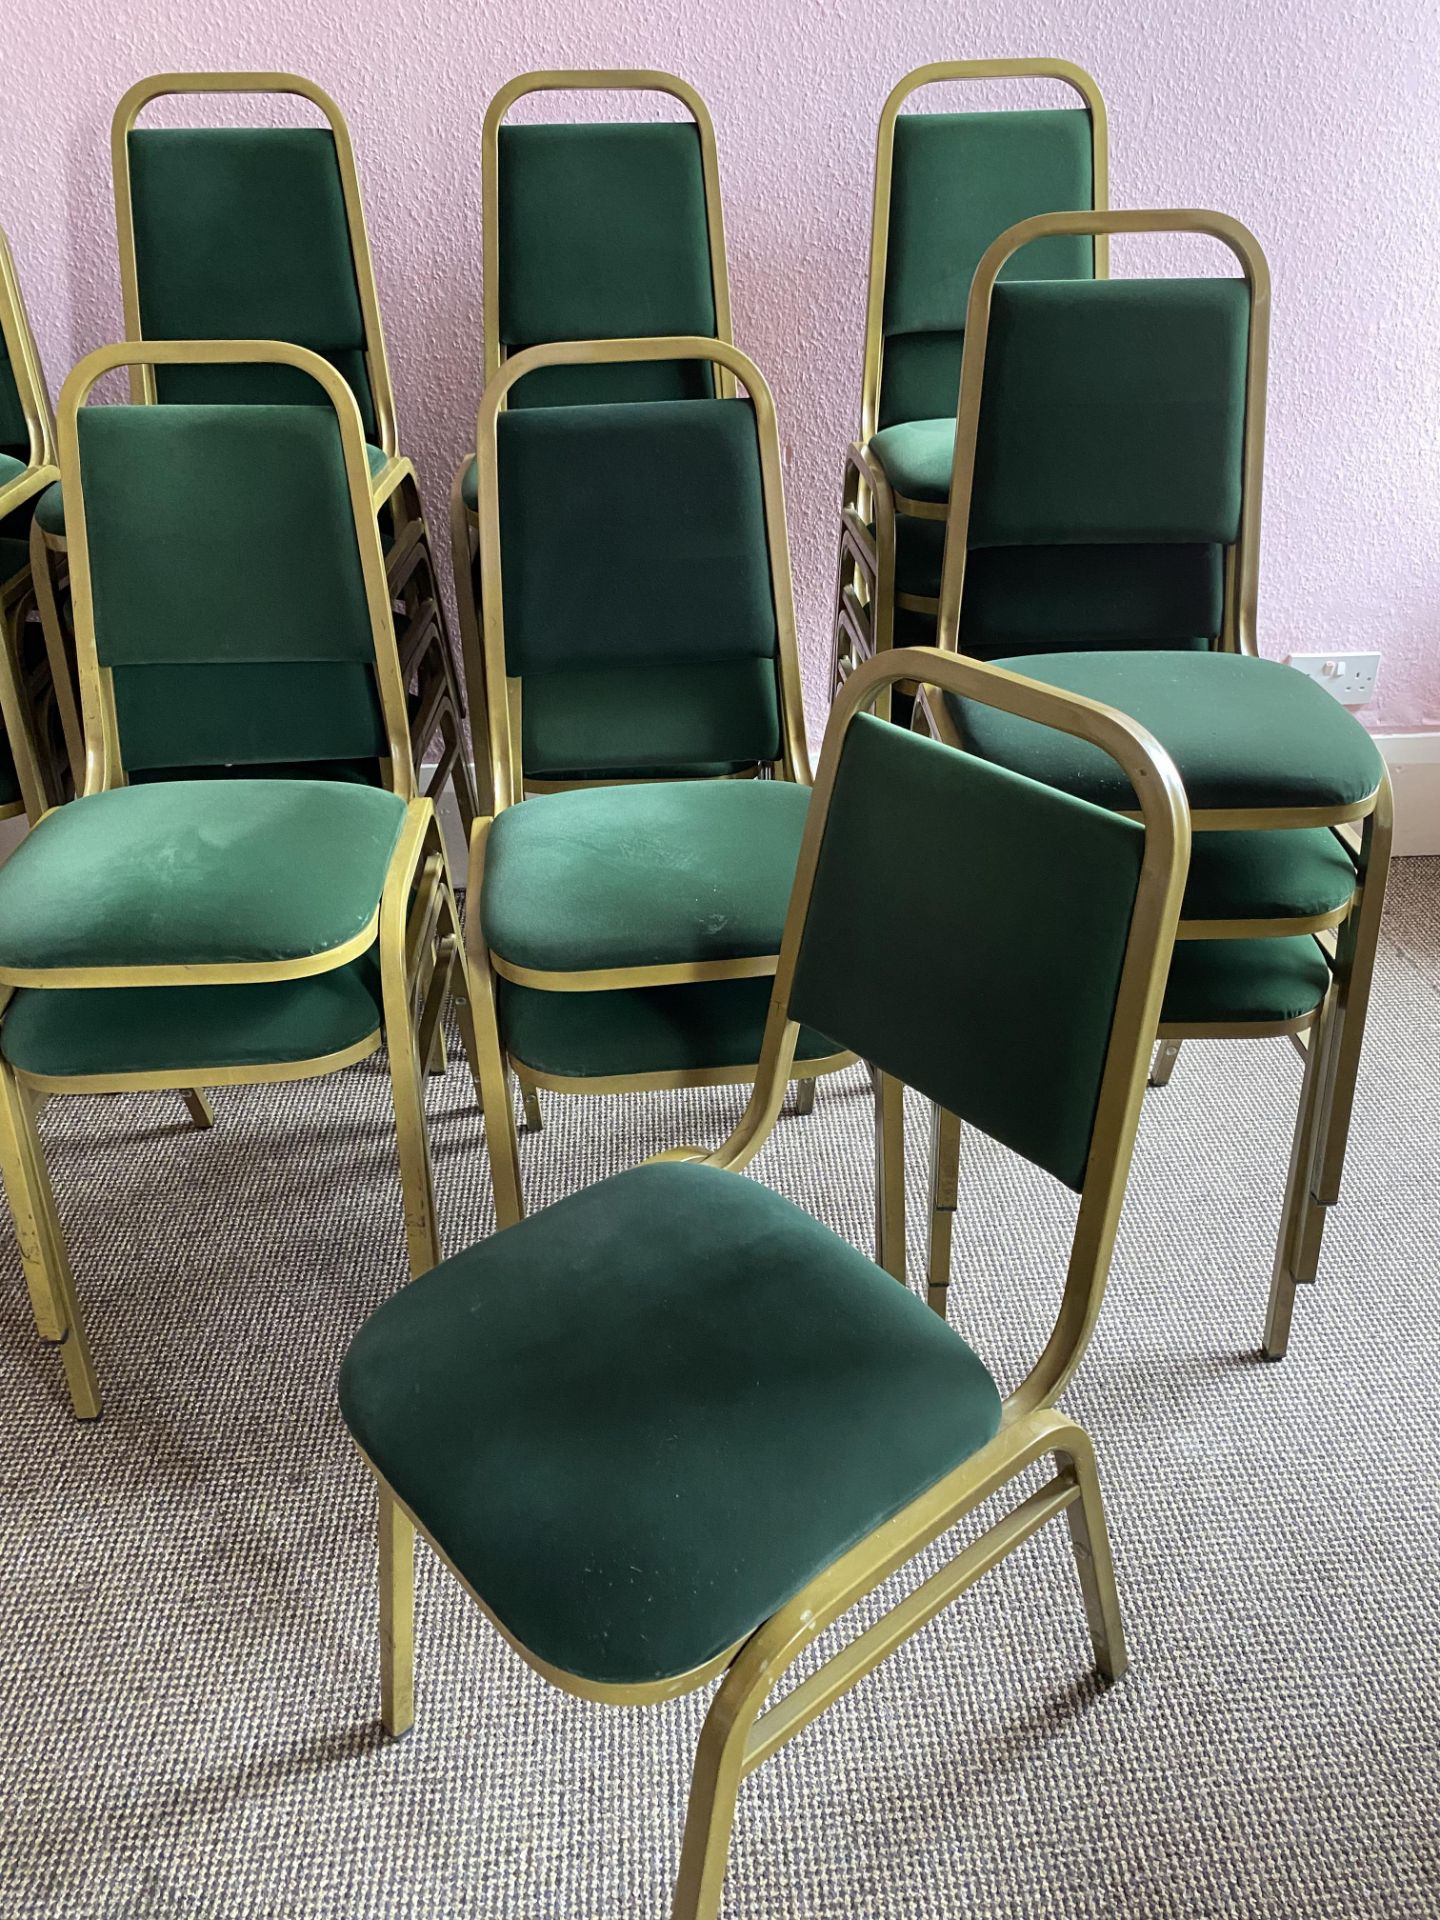 20x Gold Framed Green Upholstered Banqueting Chairs